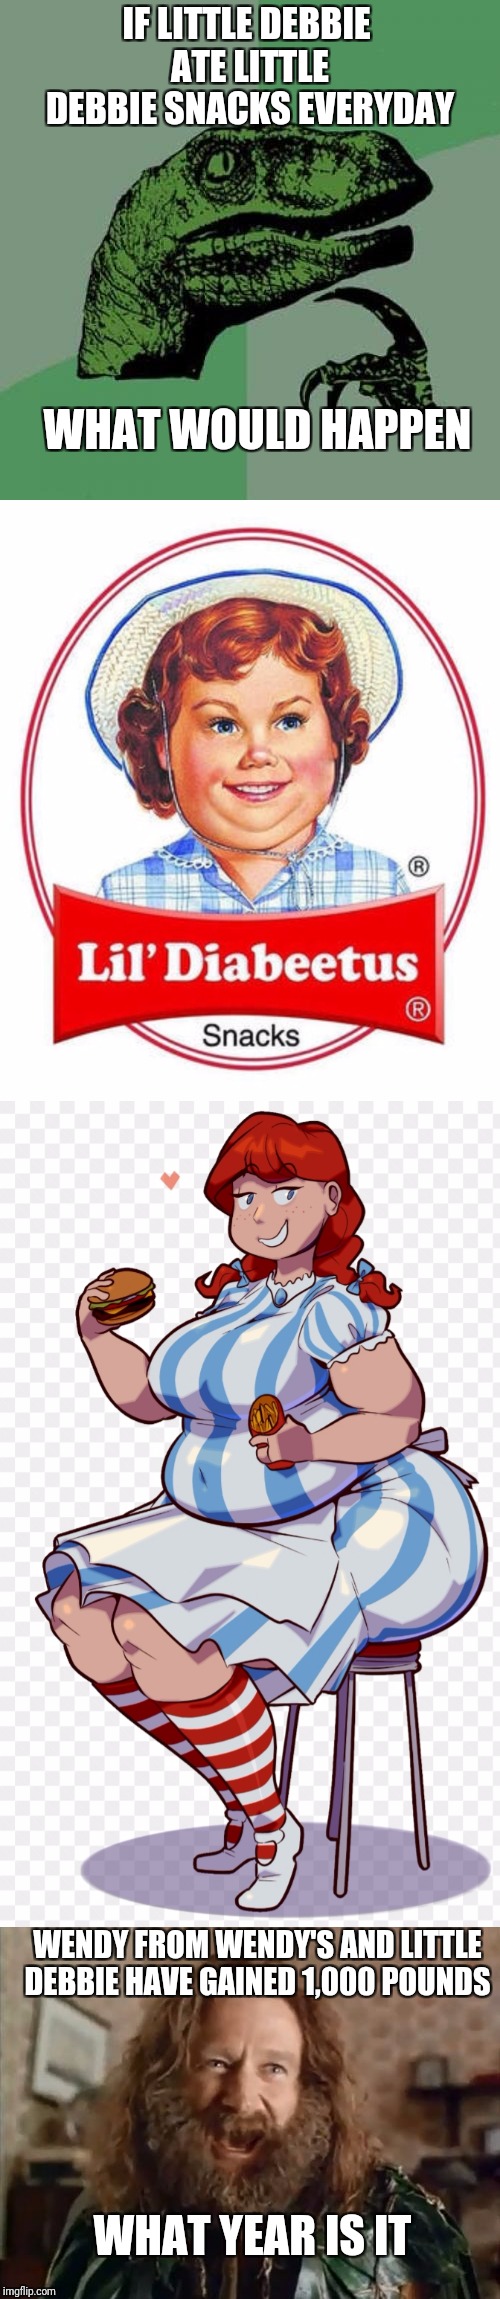 Meme mashup for MEME MASHUP WEEK Sep 24 - Sep 28th (A 44colt event) Info in comments below | IF LITTLE DEBBIE ATE LITTLE DEBBIE SNACKS EVERYDAY; WHAT WOULD HAPPEN; WENDY FROM WENDY'S AND LITTLE DEBBIE HAVE GAINED 1,000 POUNDS; WHAT YEAR IS IT | image tagged in memes,philosoraptor,funny,food,44colt,meme mashup week | made w/ Imgflip meme maker